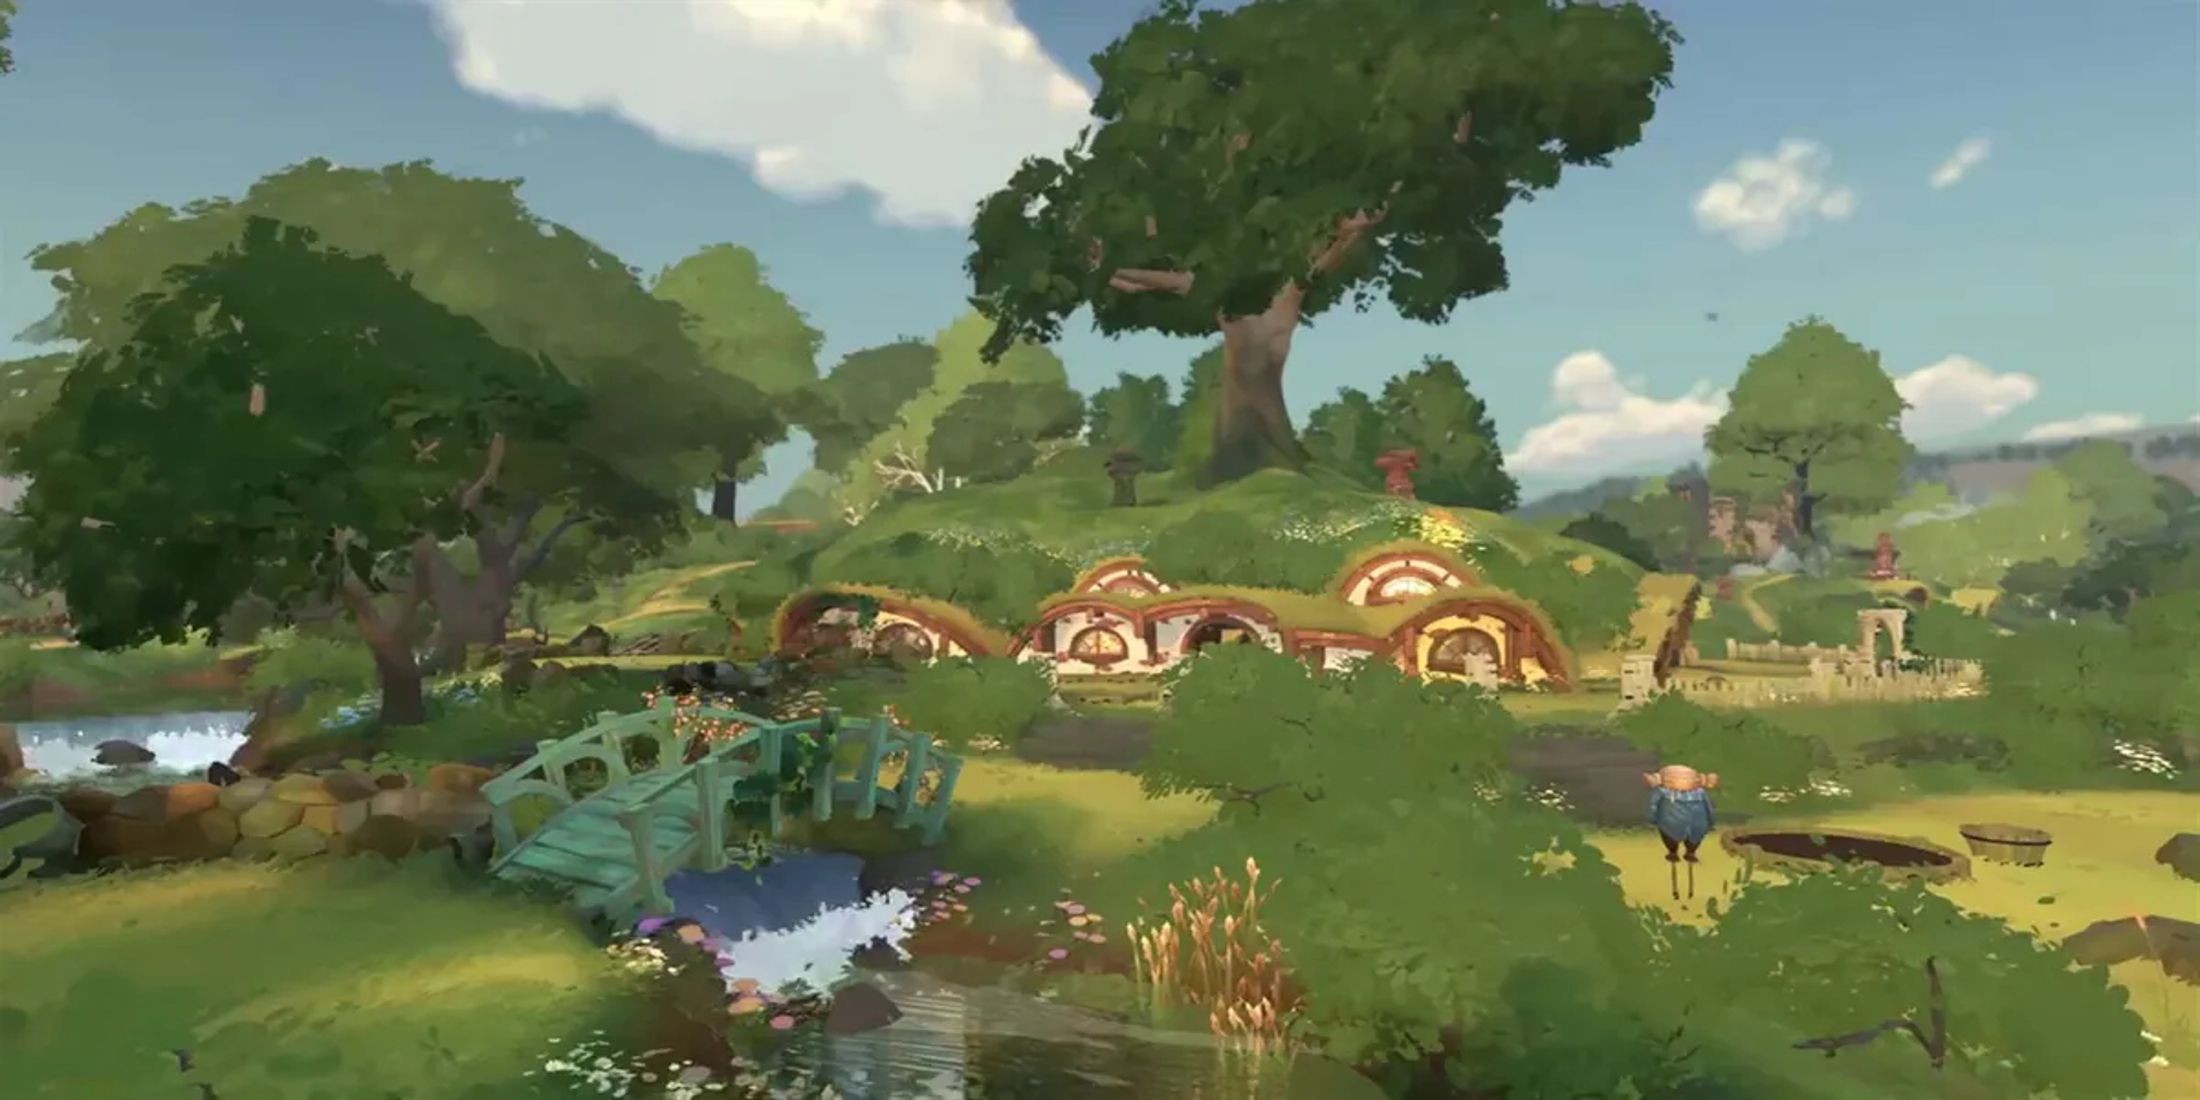 Tales of The Shire Faces a Double Edged Issue With It's Hobbit Holes 